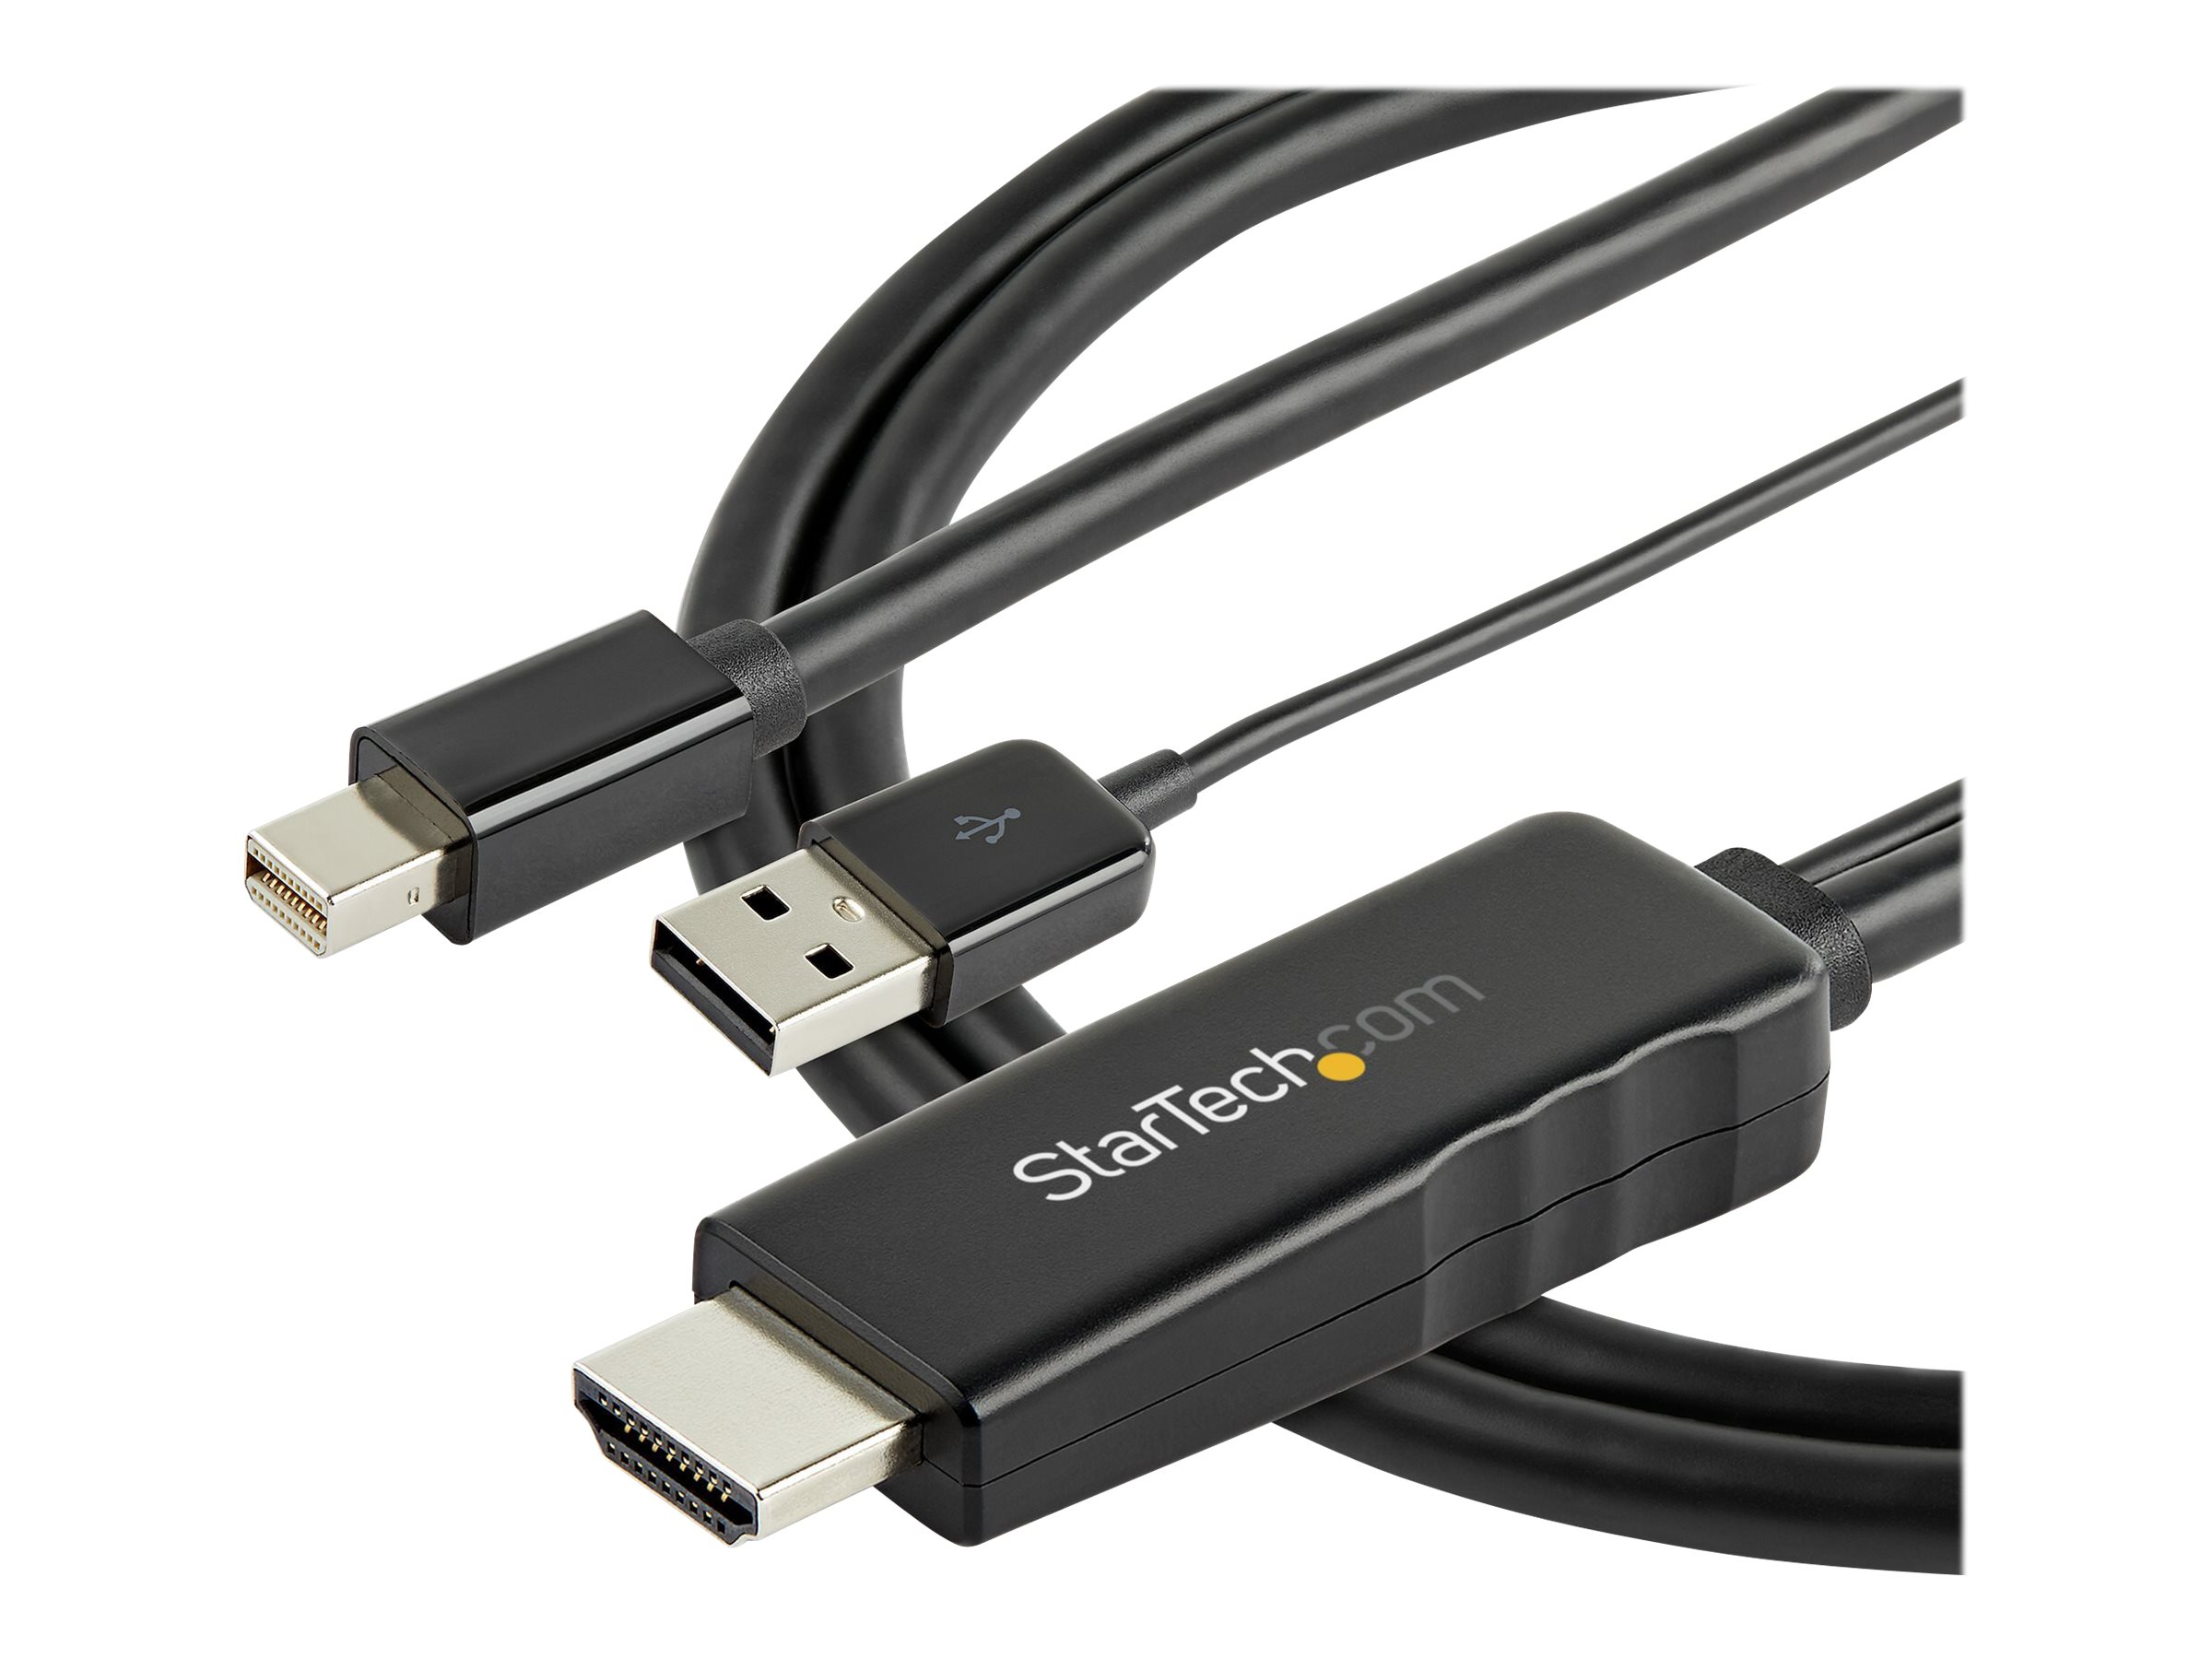 StarTech.com 3ft 1m USB C to HDMI Cable - 4K USB Type-C HDMI Video Adapter